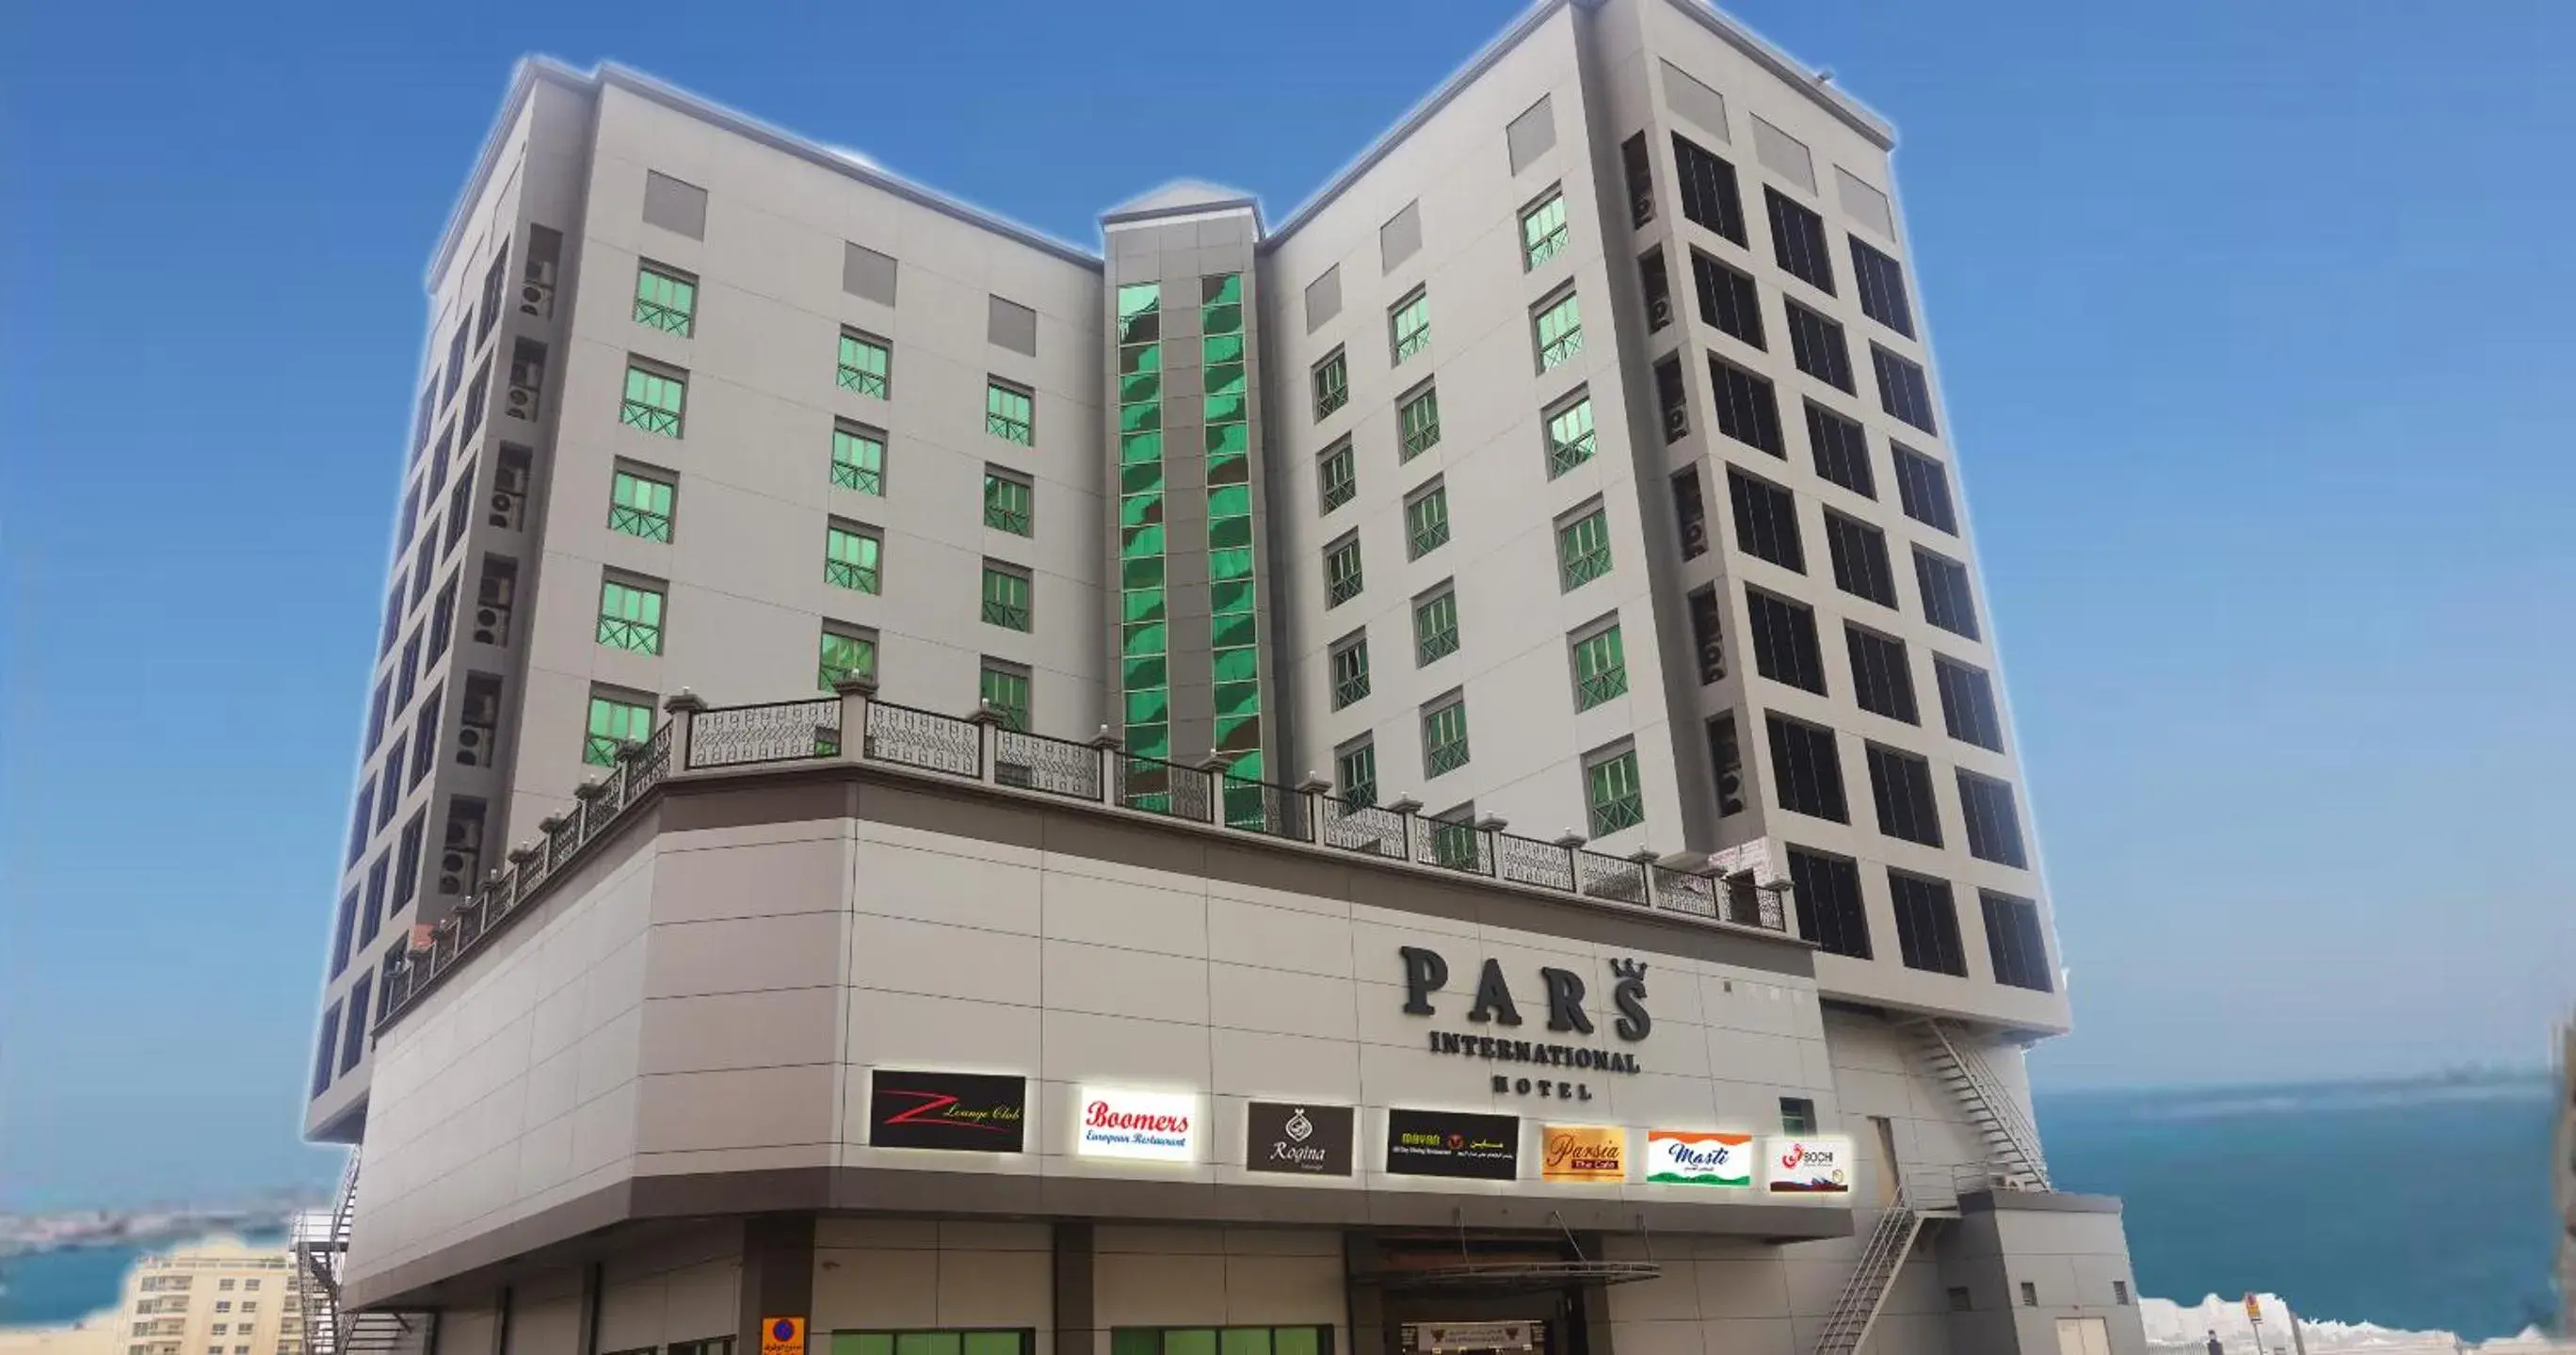 Property Building in Pars International Hotel